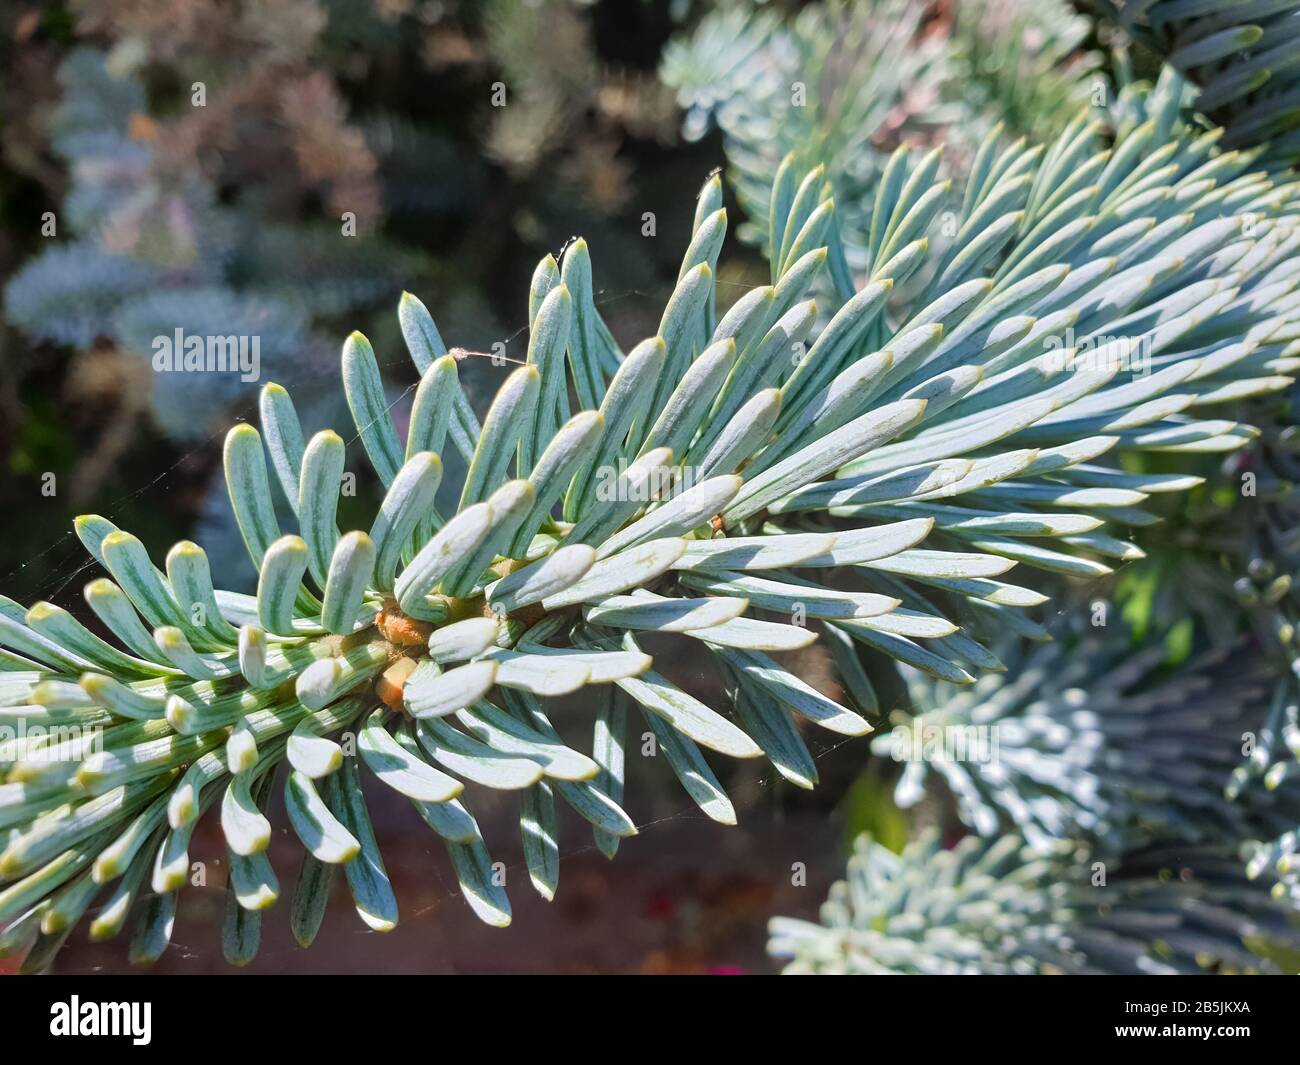 Close up of young shoot of Abies procera or Noble fir in a botanical garden Stock Photo